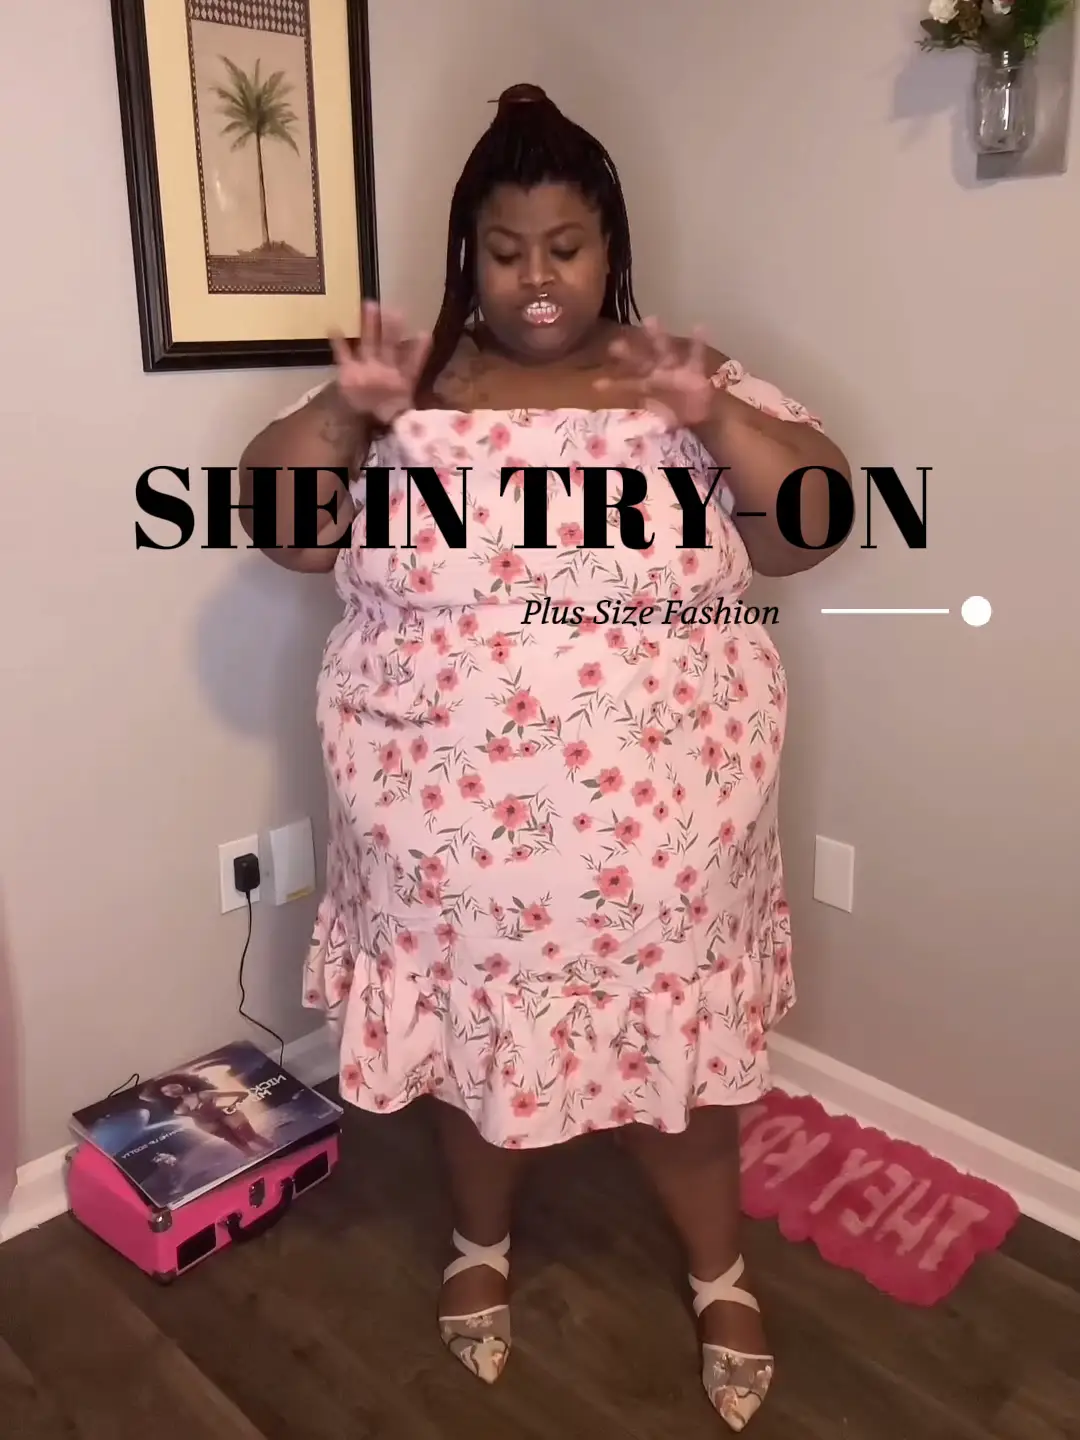 I'm a size 20 & tried on Shein plus size dresses - one's perfect